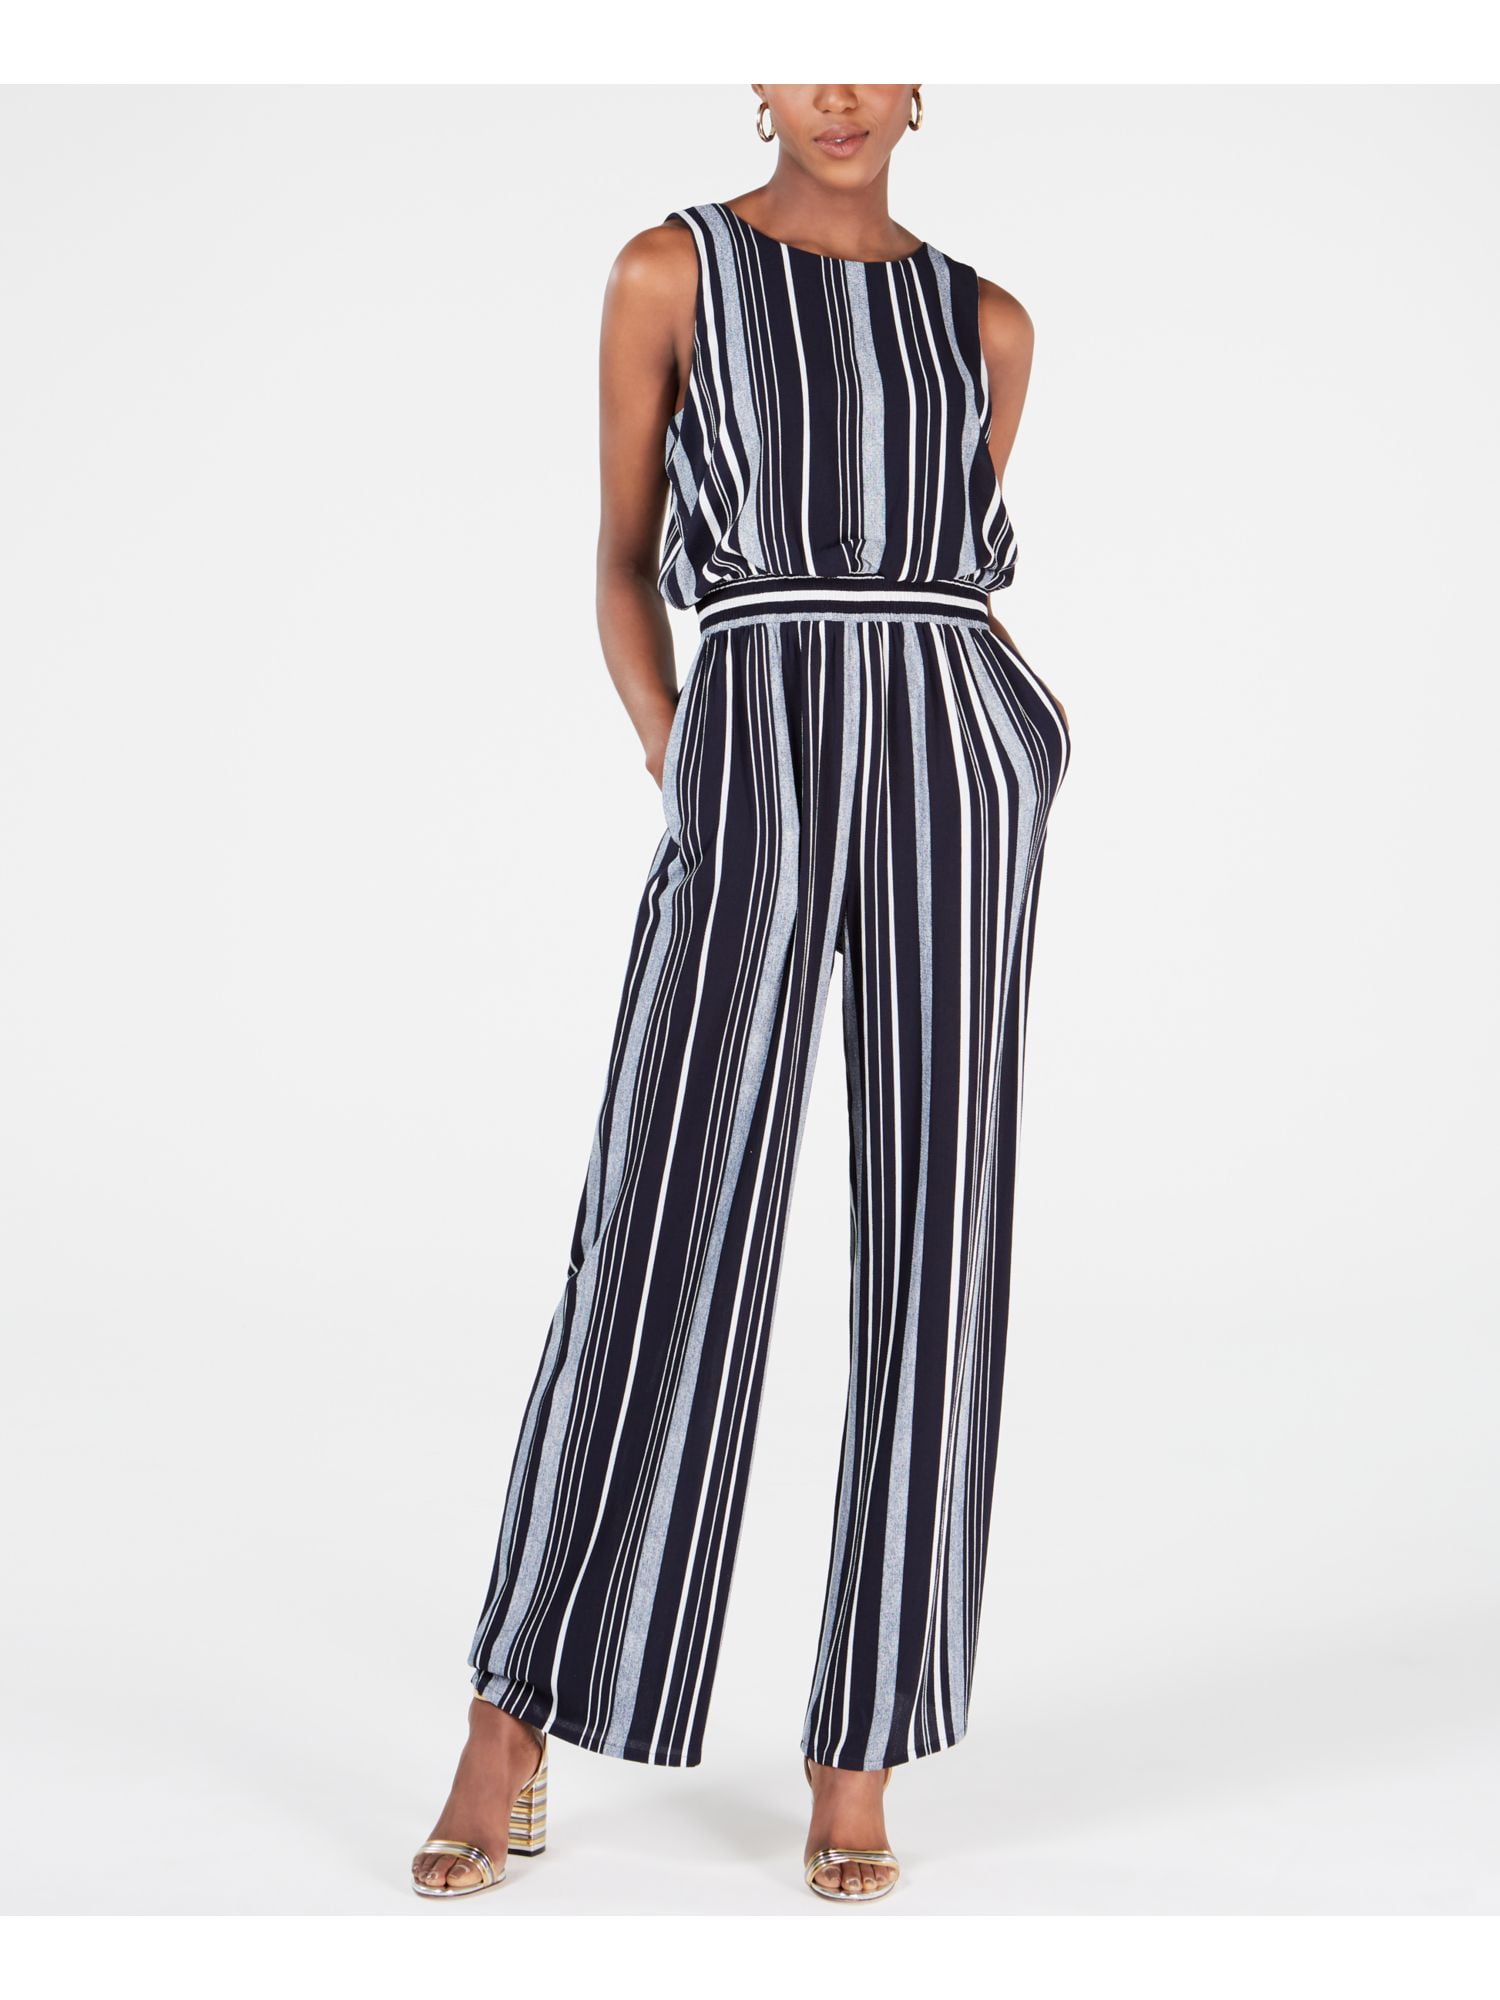 Crystal Doll Womens Striped Cropped Gaucho Jumpsuit Juniors BHFO 9242